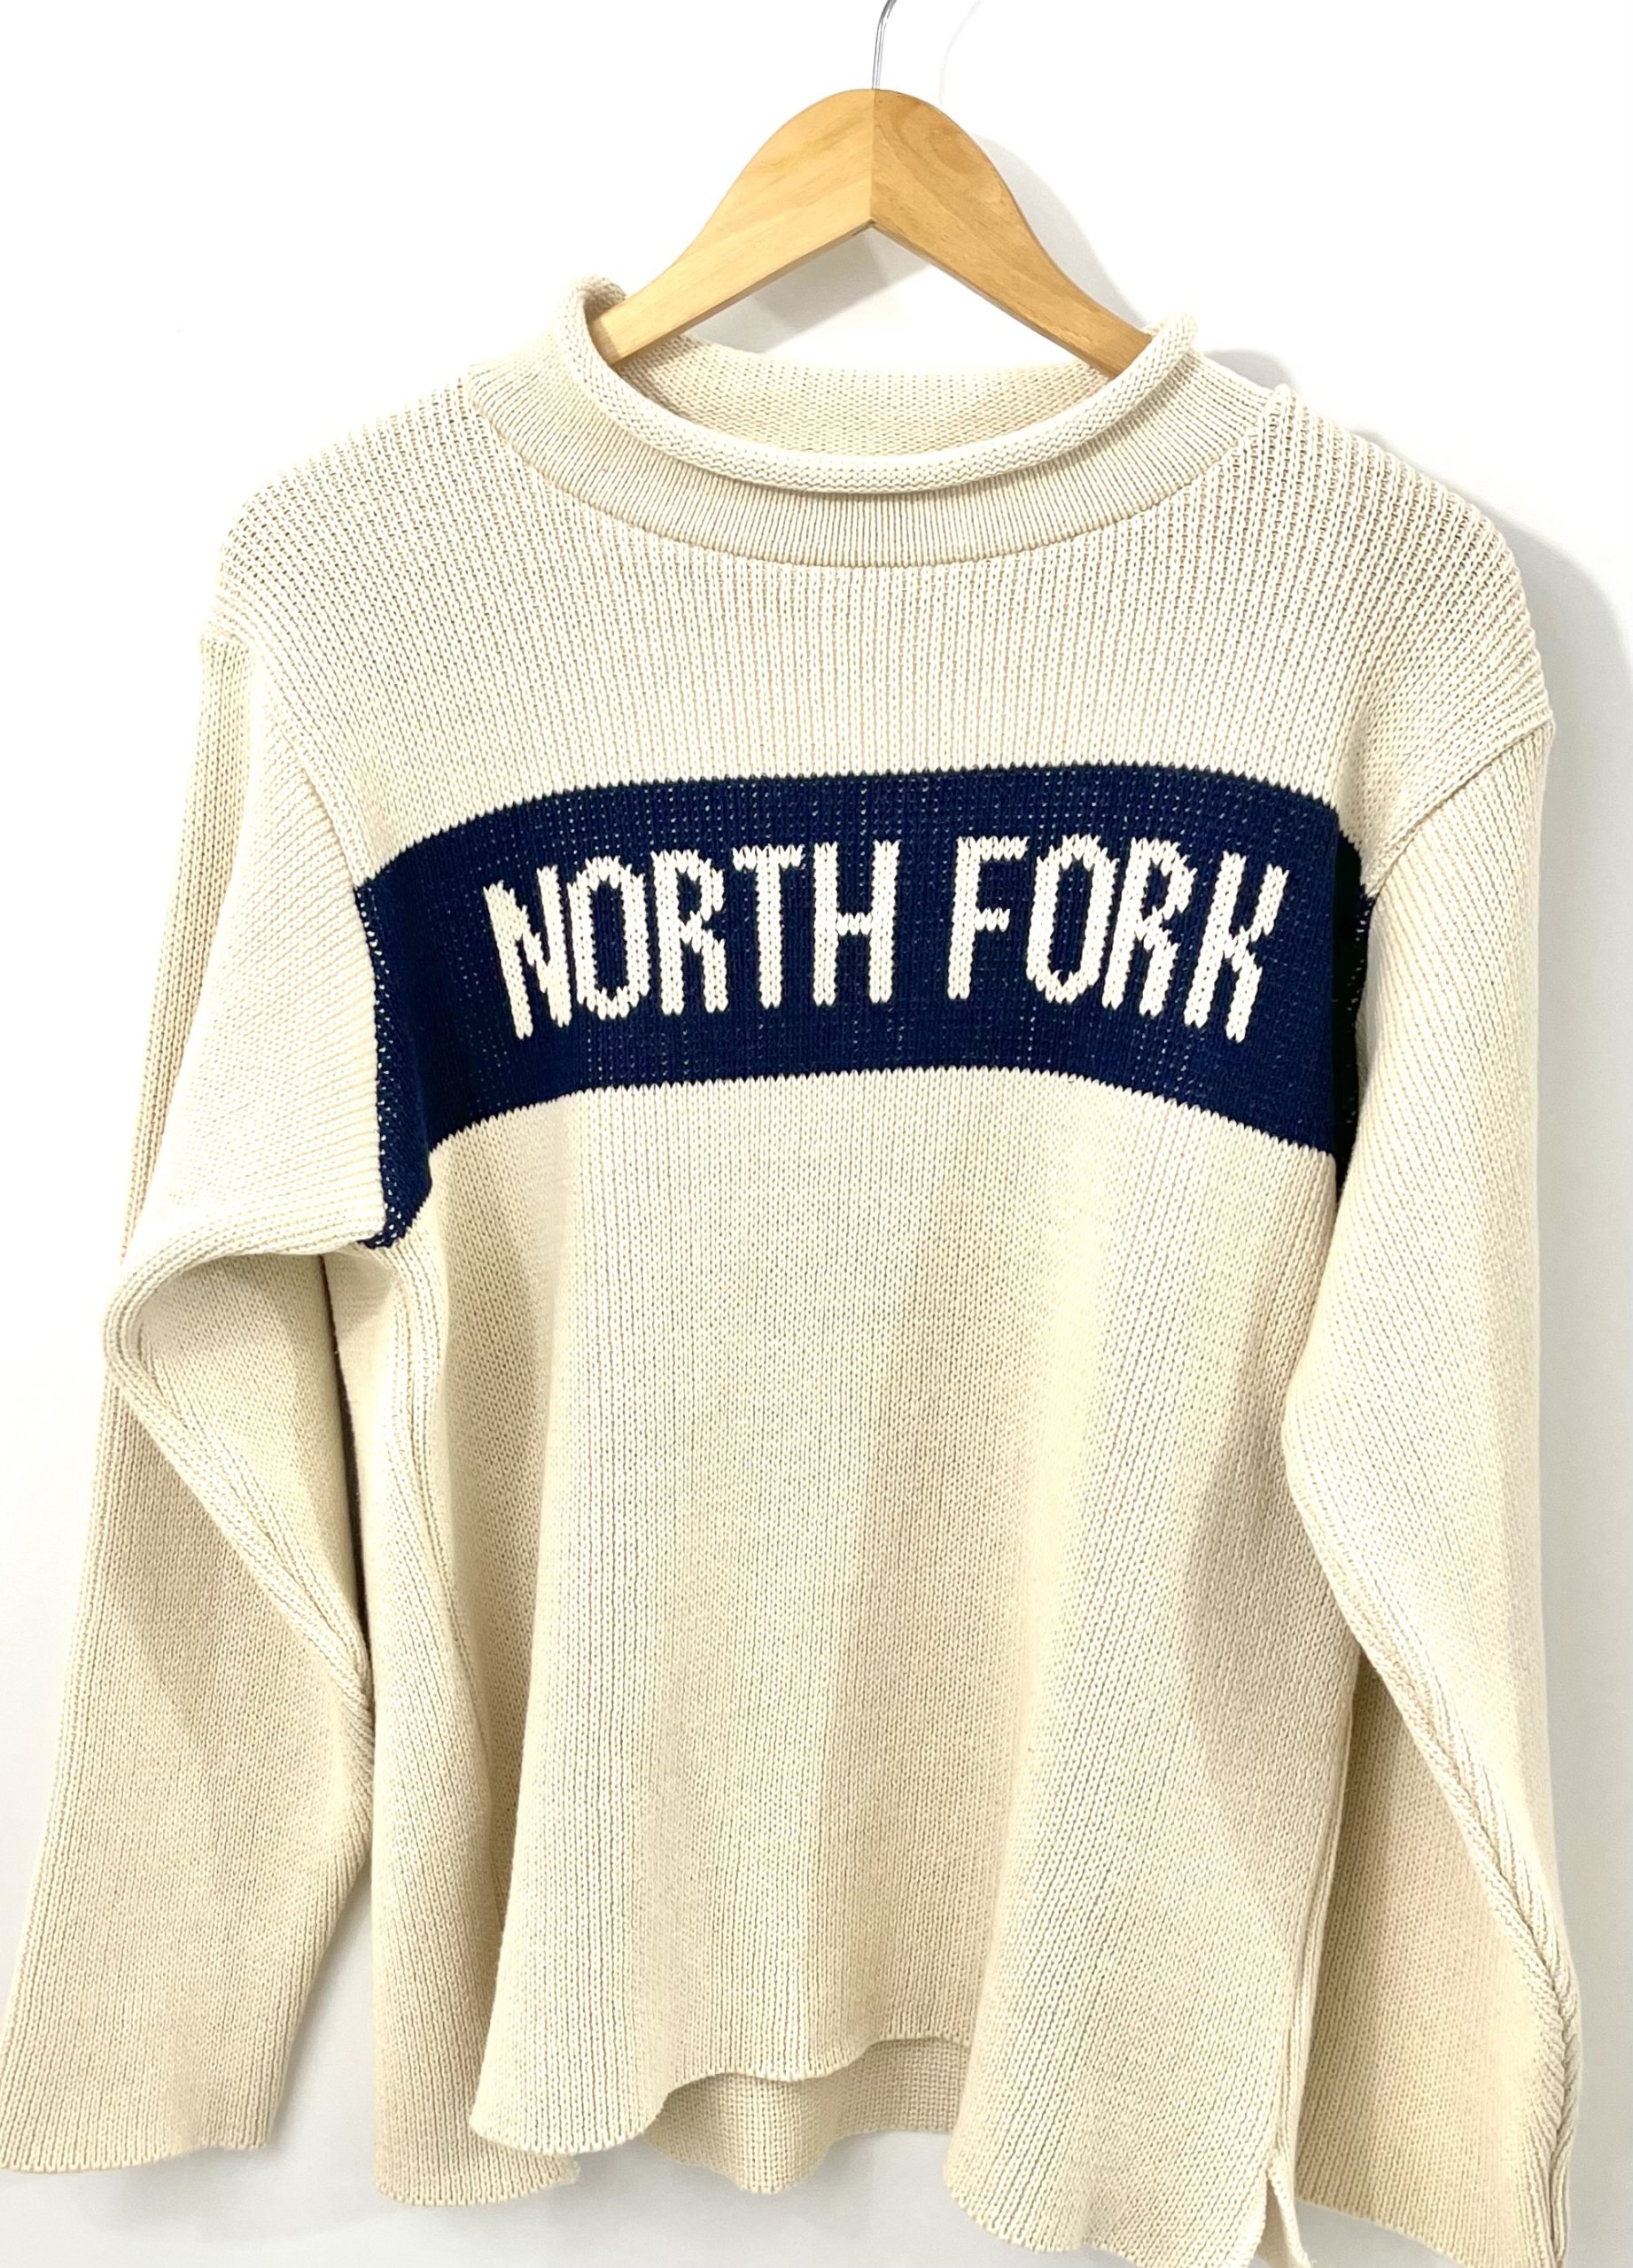 Summer fashion - The North Fork Sweater sold at Beacheeky